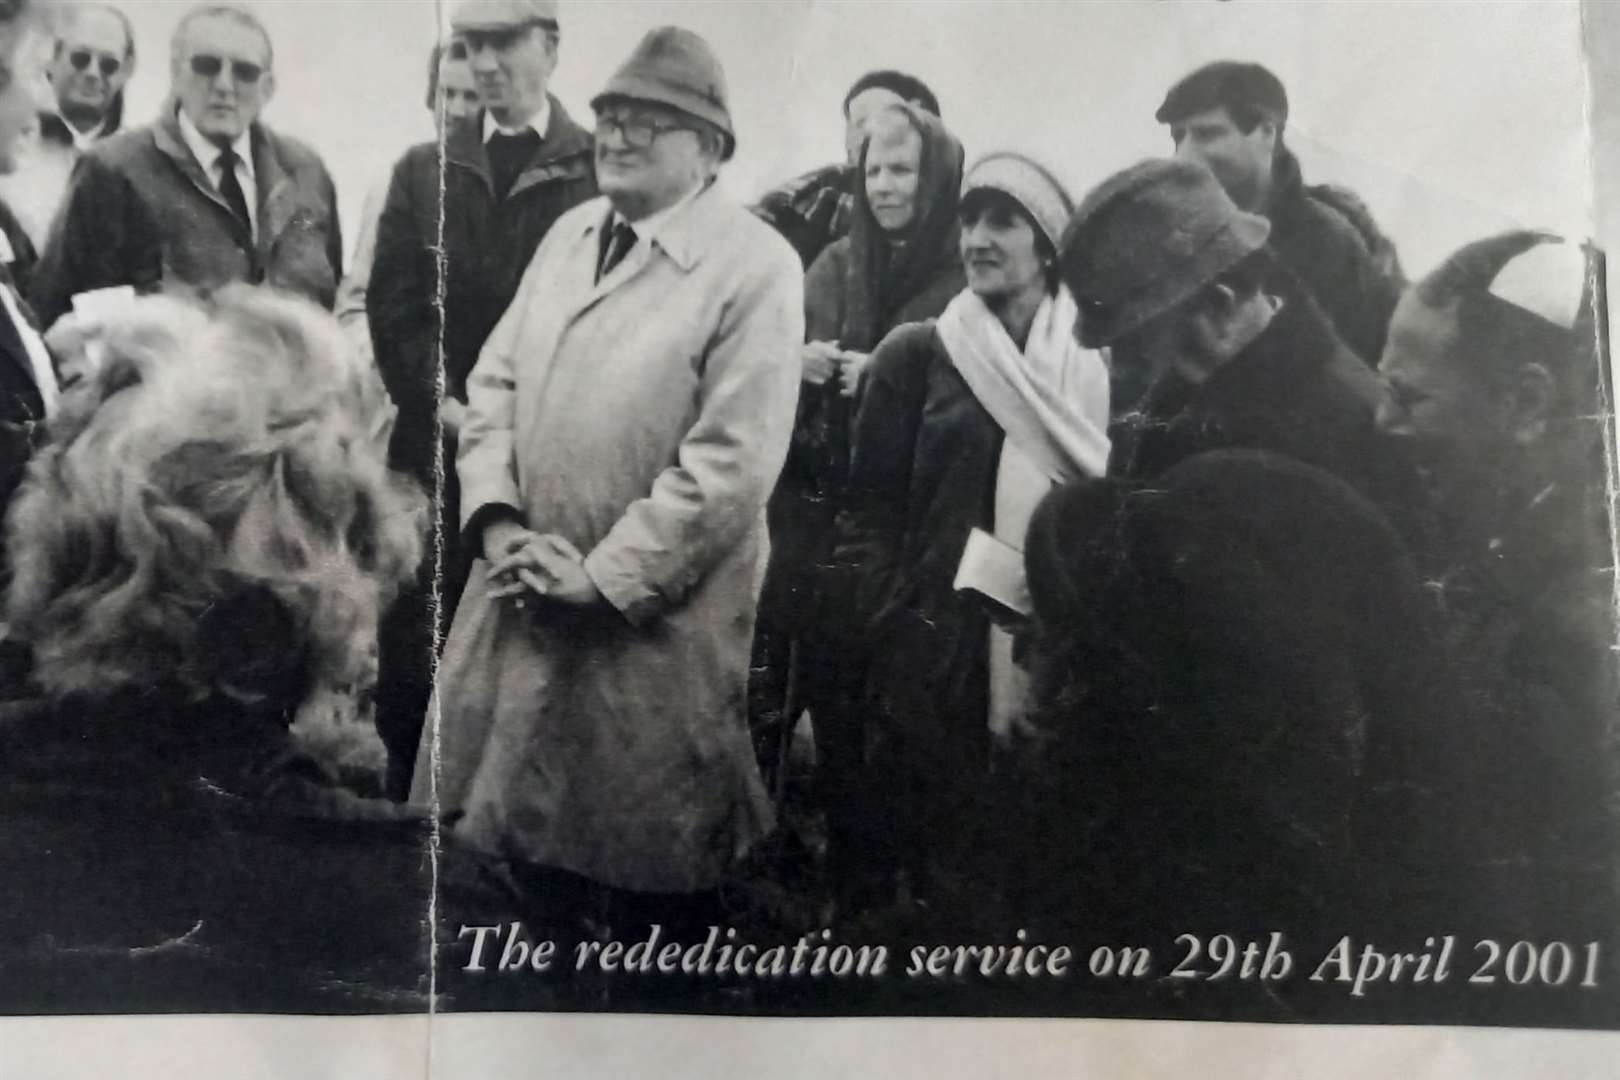 A rededication service carried out back in 2001